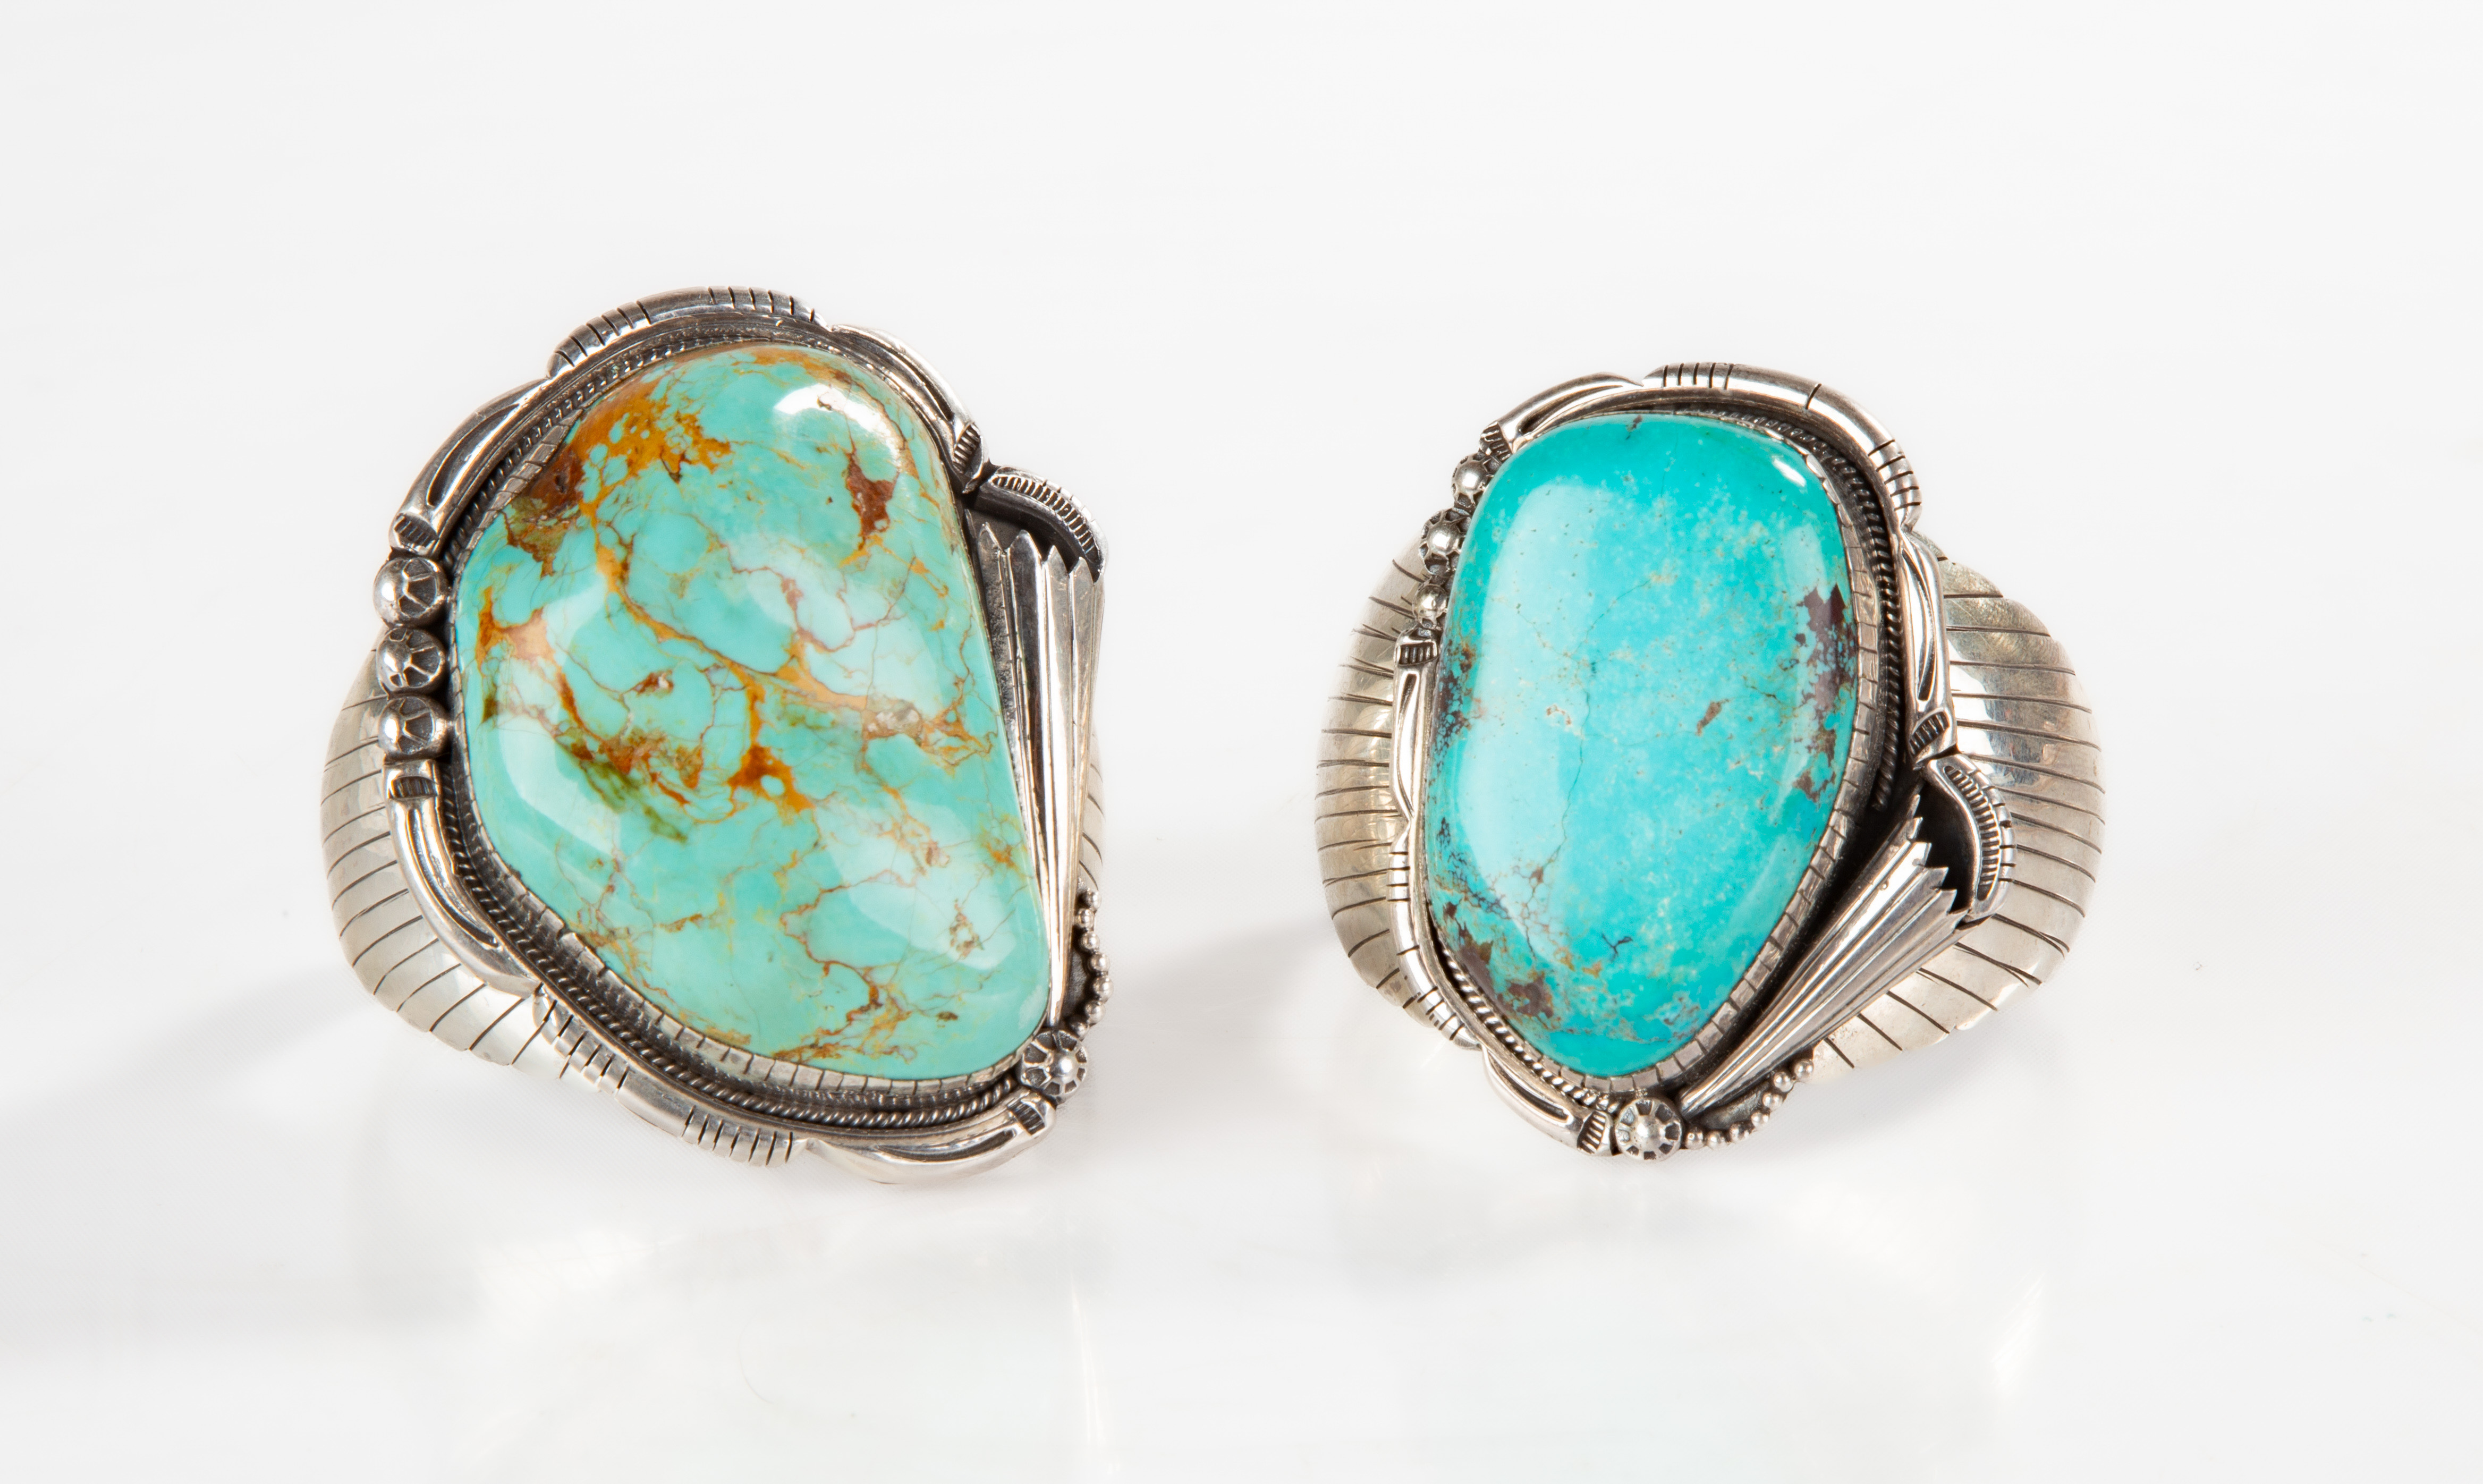  2 NAVAJO STERLING SILVER TURQUOISE 2faf5df